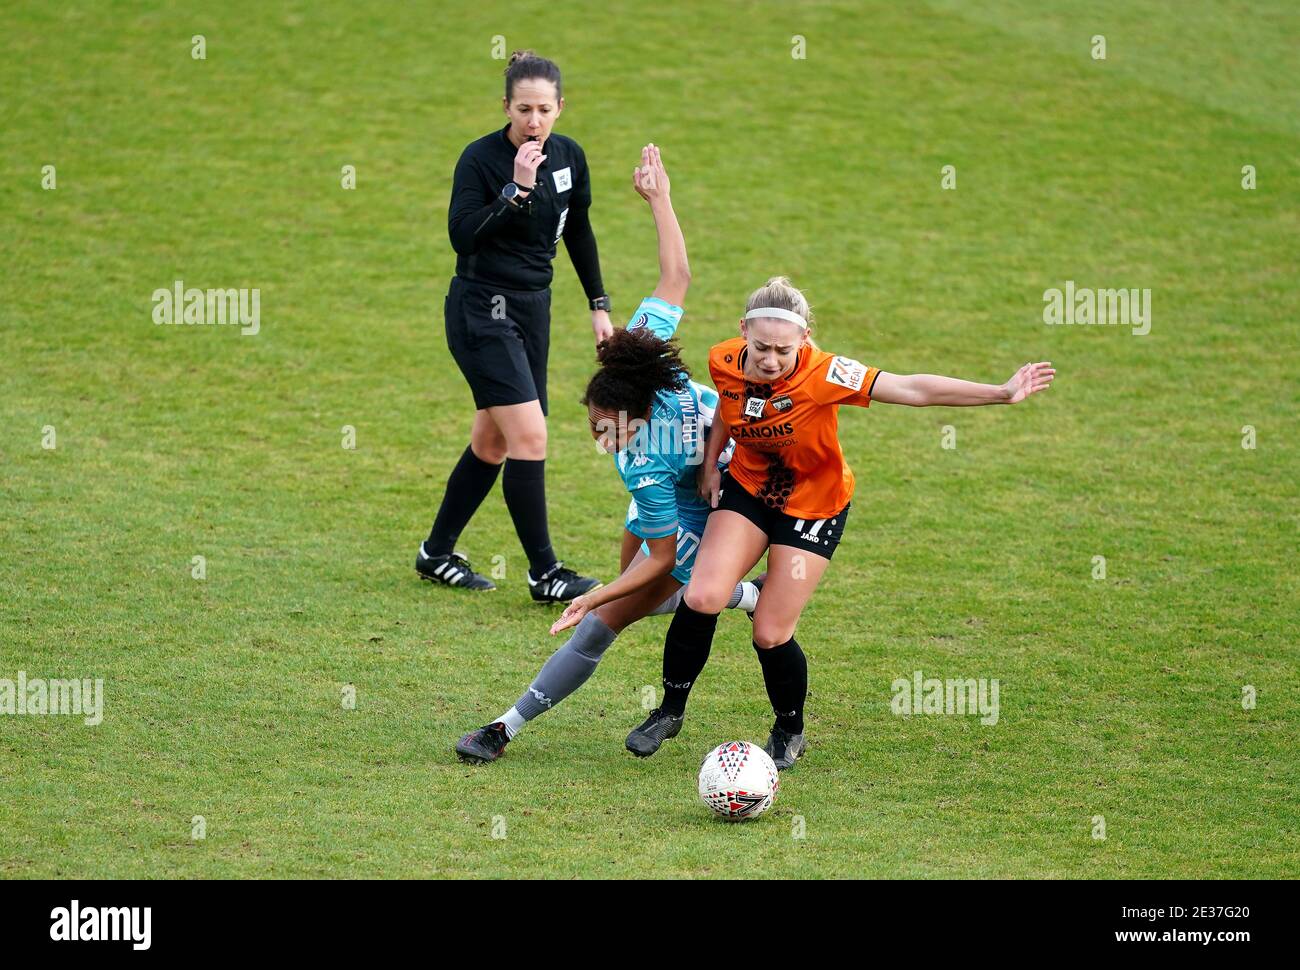 London City's Atlanta Primus and London Bees' Charlie Estcourt (right) battle for the ball as referee Georgia Ball looks on during the FA Women's Championship match at The Hive, Barnet. Stock Photo